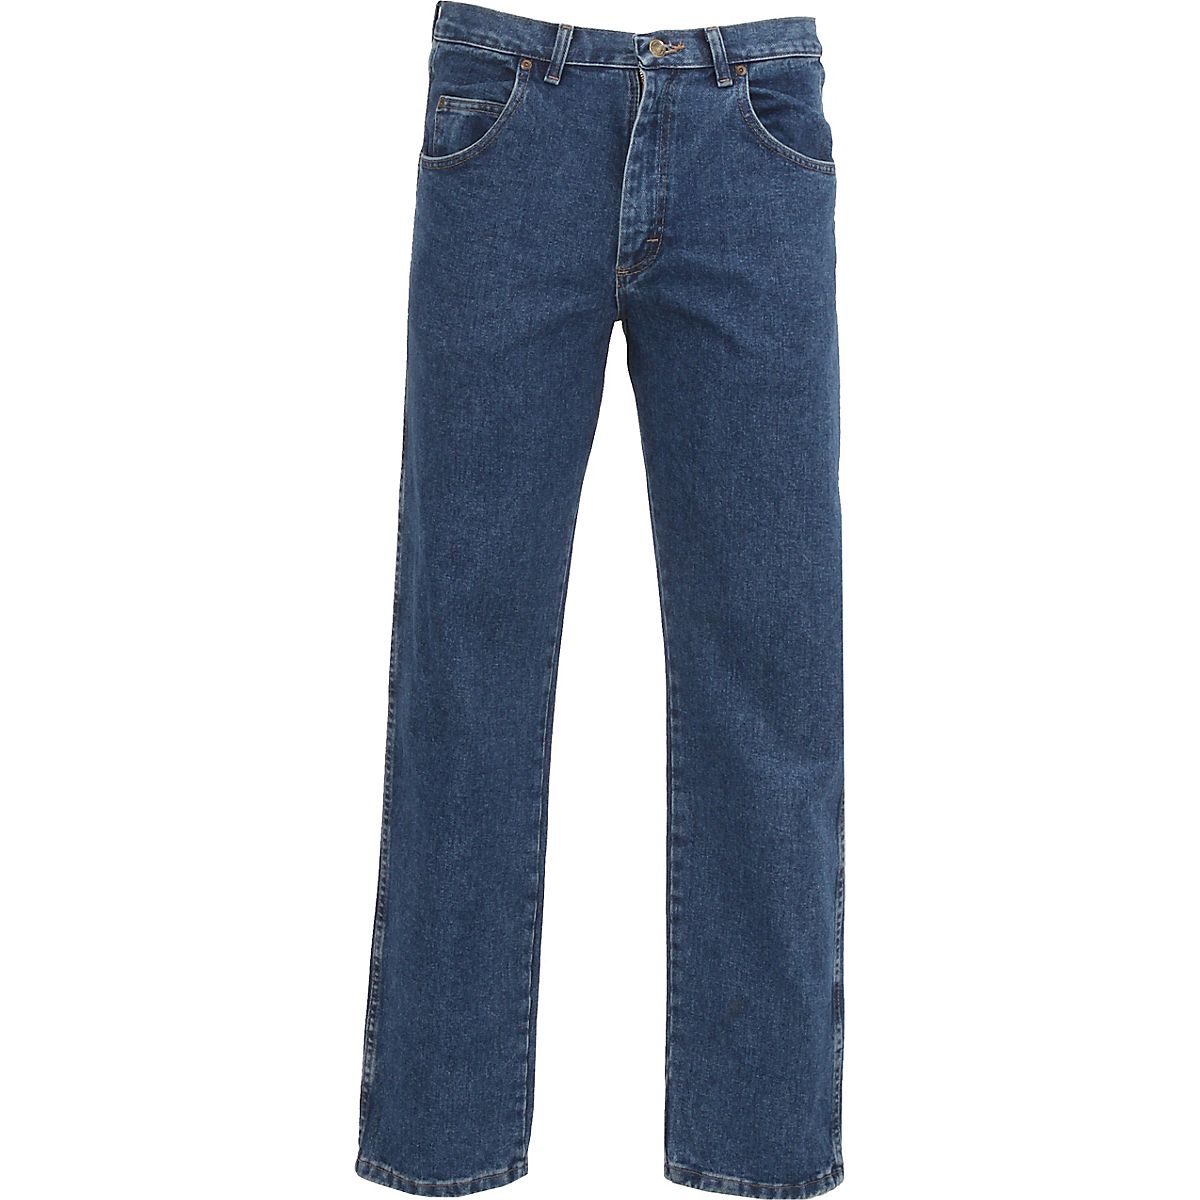 Wrangler Rugged Wear Men's Relaxed Fit Jean | Academy